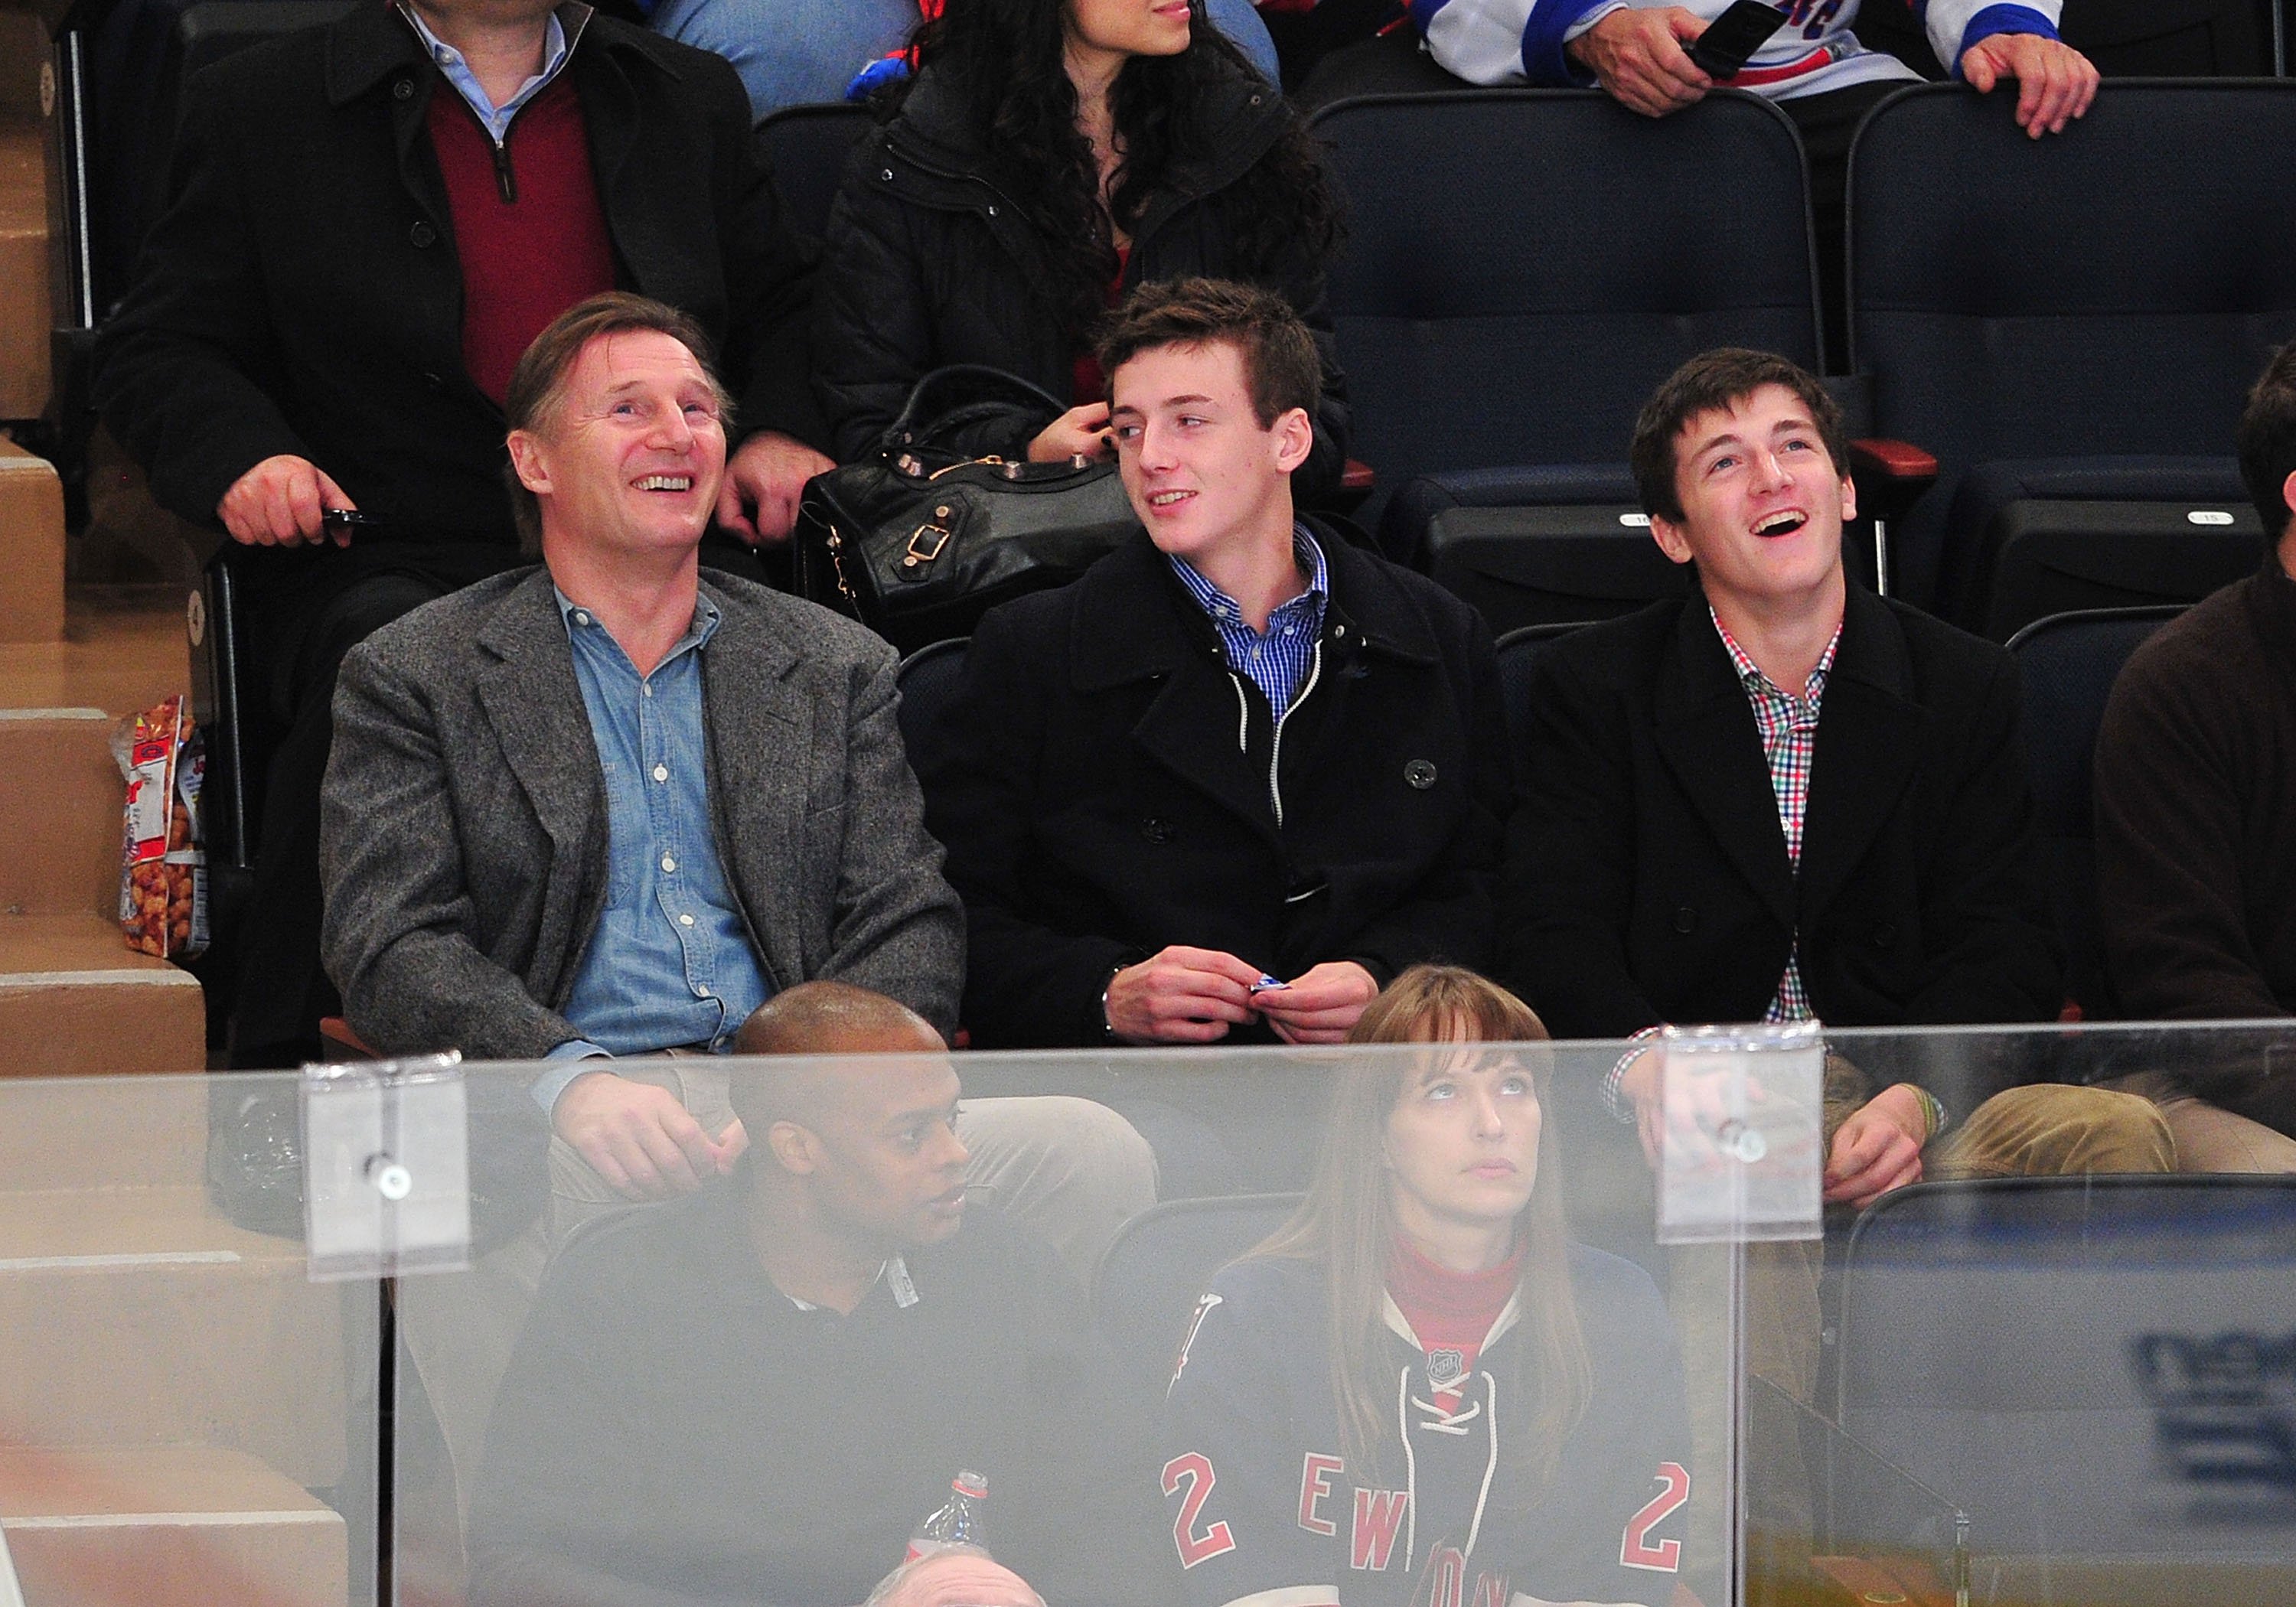 Liam Neeson with sons, Michael Neeson and Daniel Neeson, during the San Jose Sharks vs the New York Rangers game at Madison Square Garden on October 31, 2011 in New York City. / Source: Getty Images